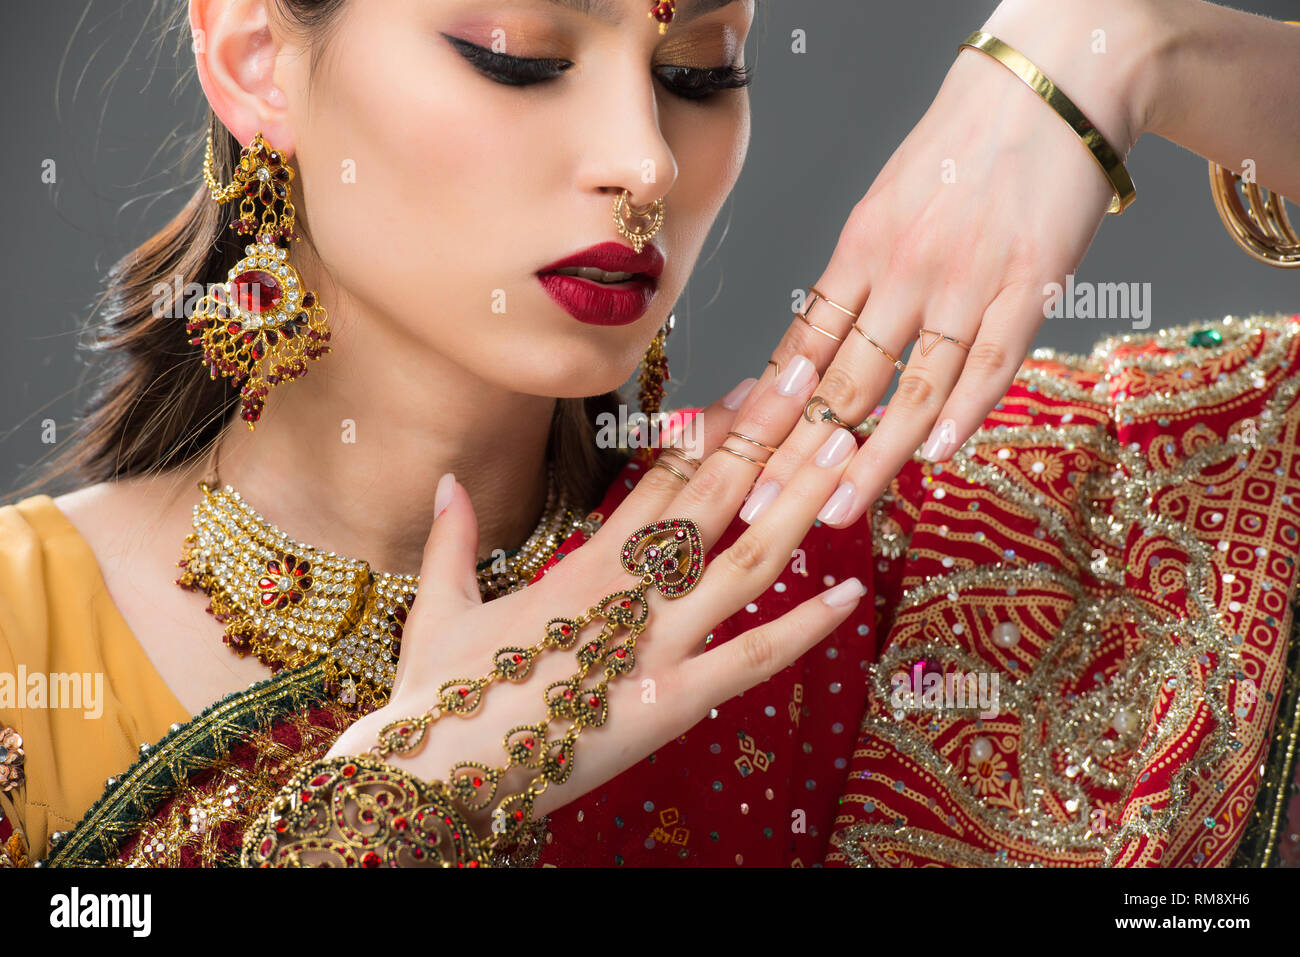 beautiful indian woman in sari and accessories on hands, isolated on grey Stock Photo